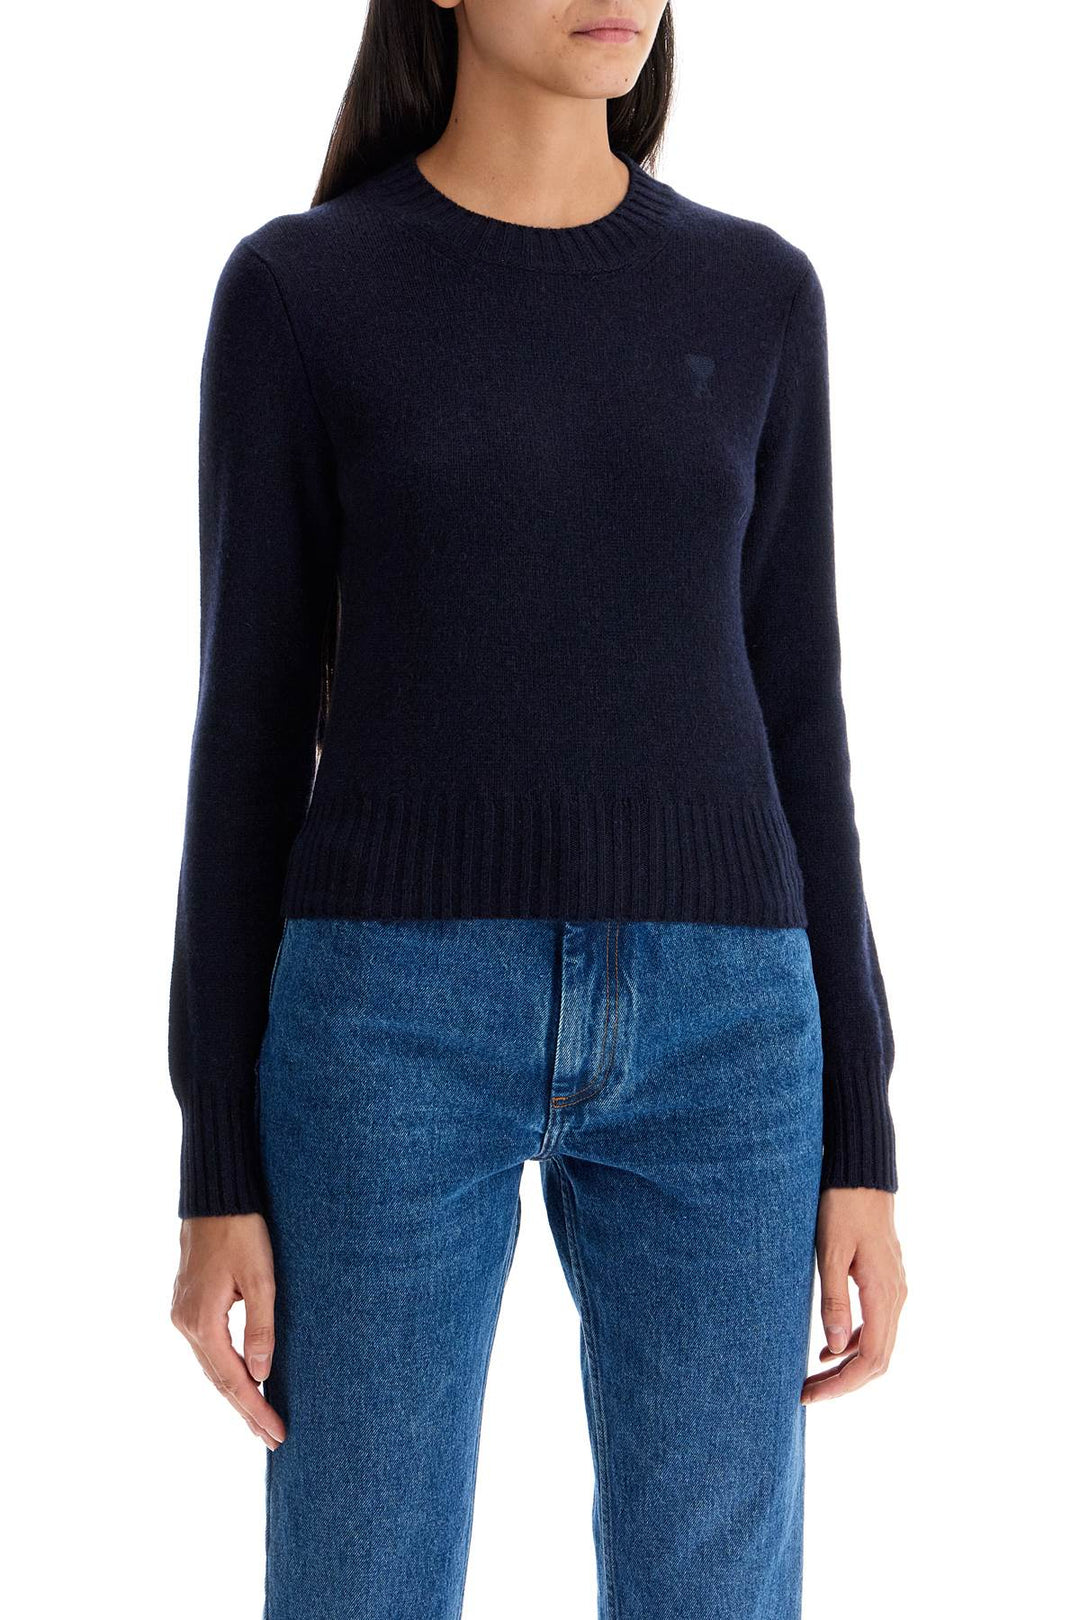 Ami Alexandre Matiussi Cashmere And Wool Pullover   Blue